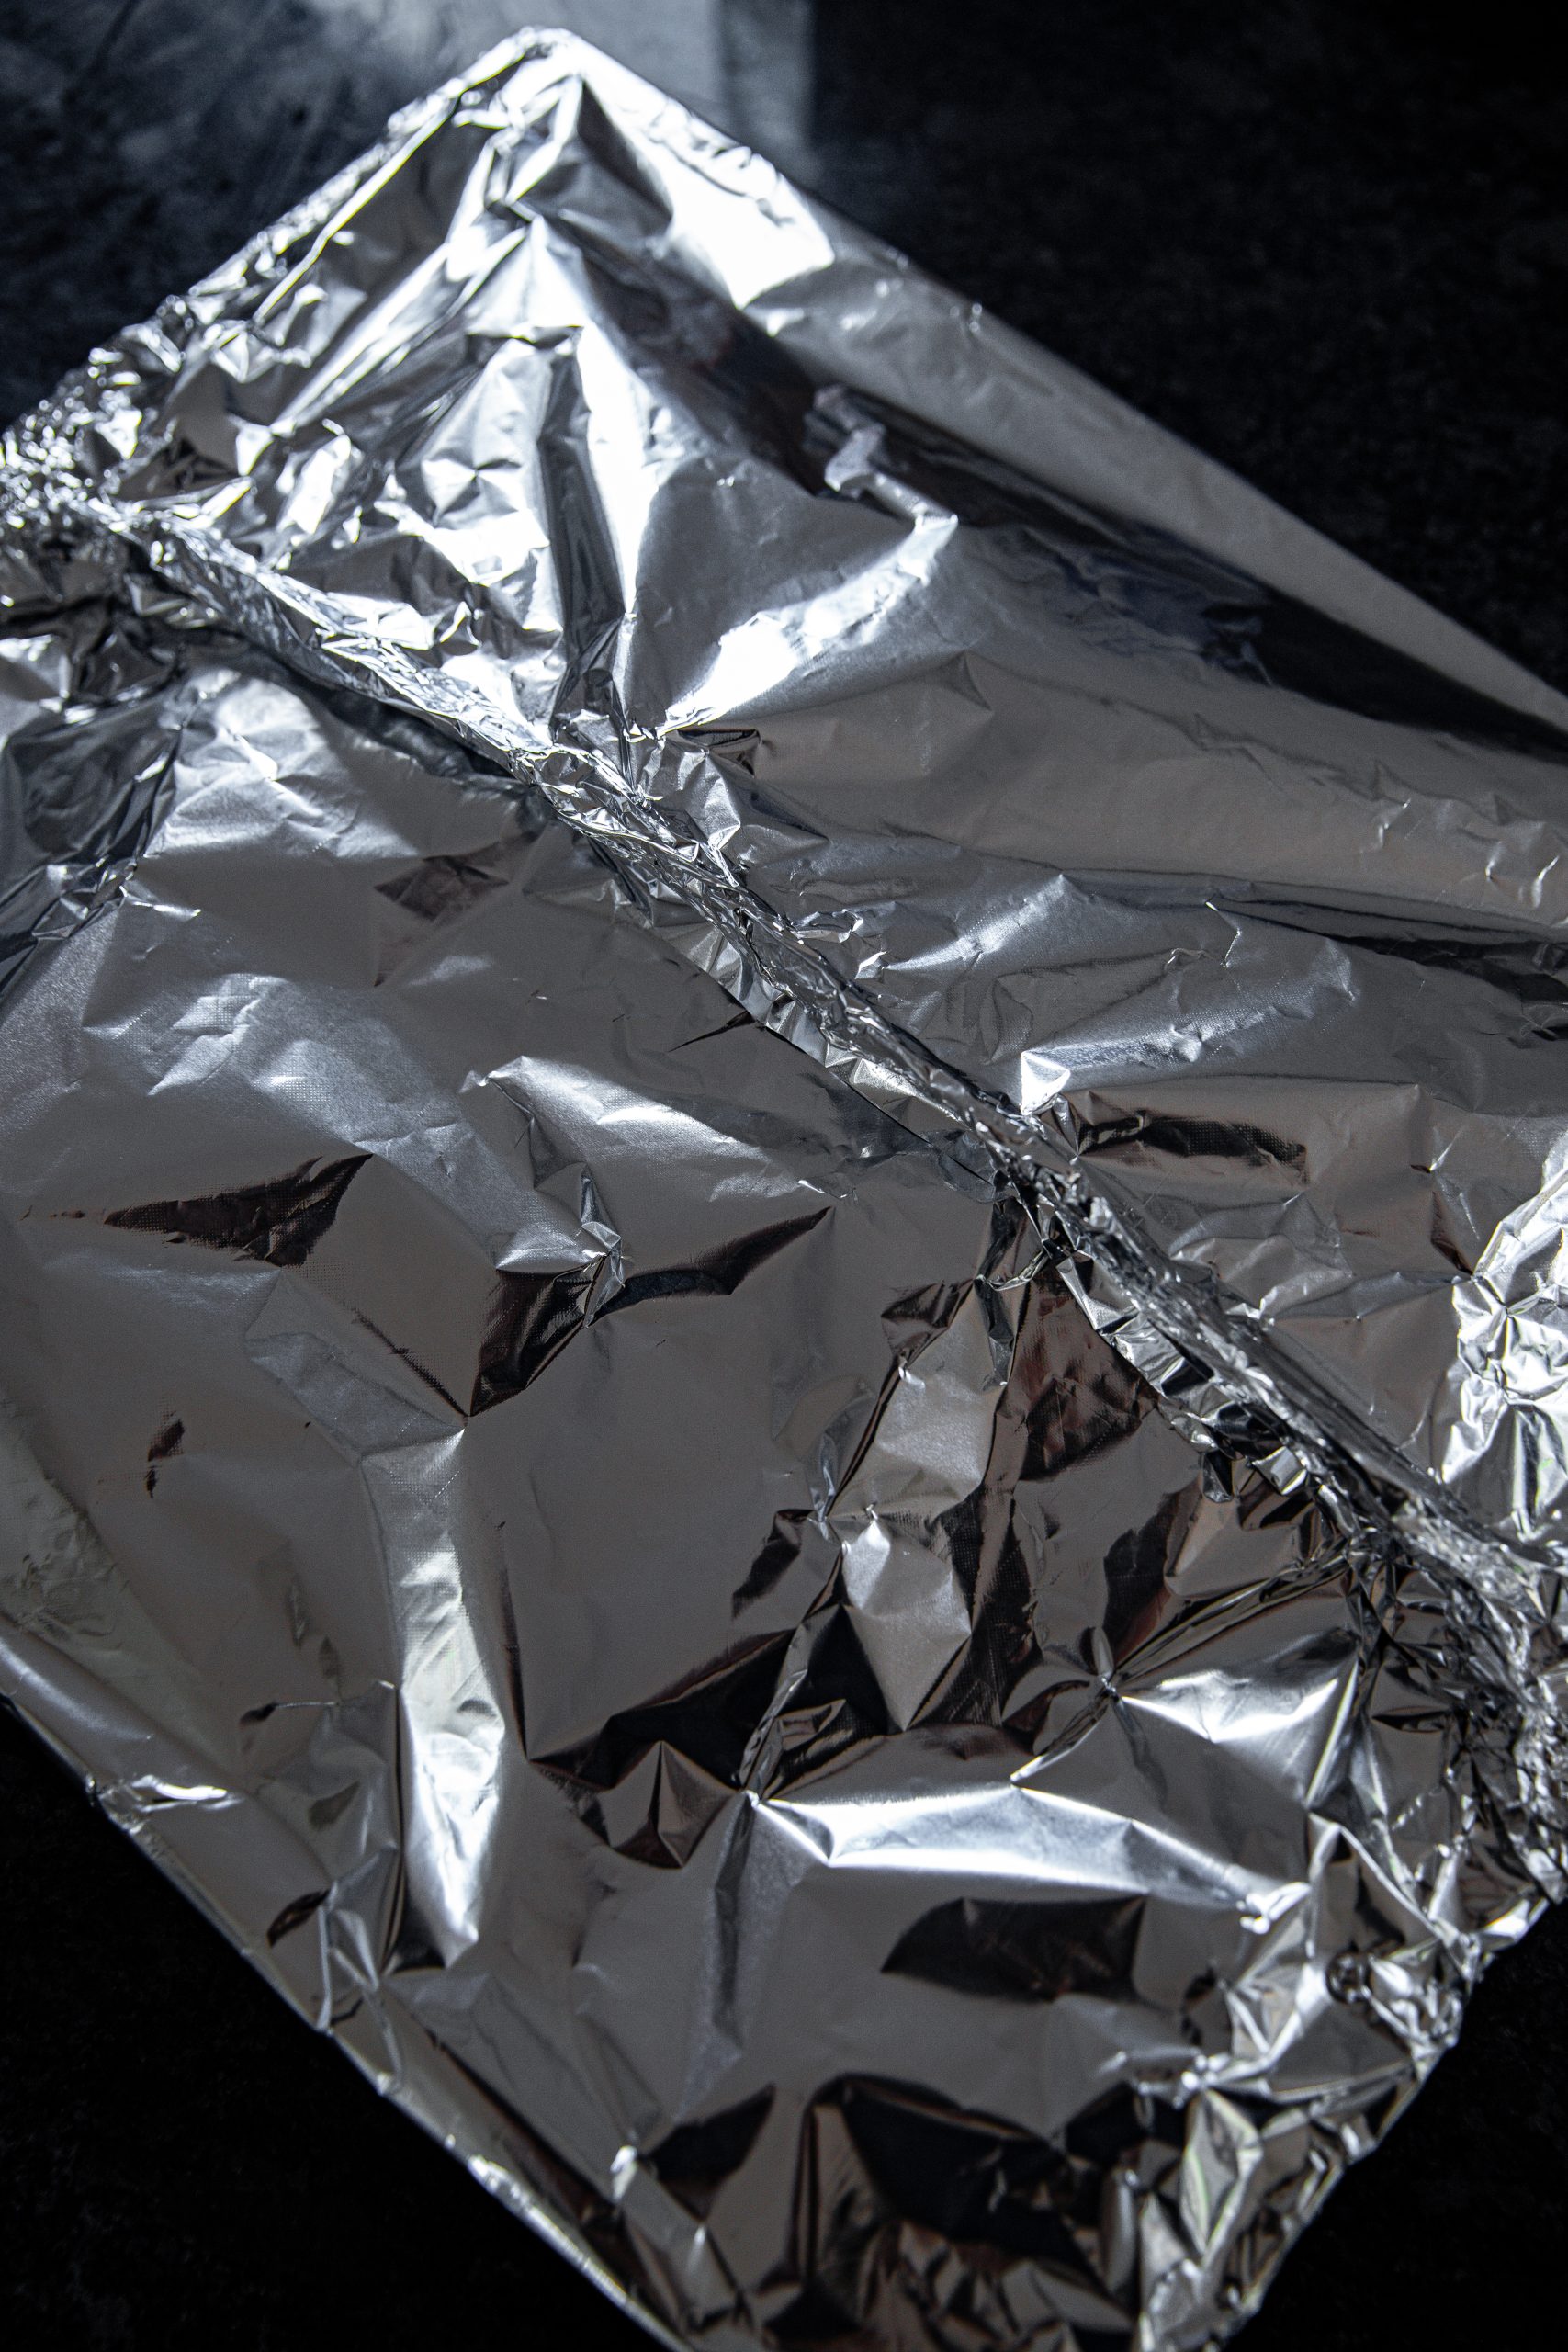 Place the ribs on the grate over the liquid and then make a foil tent over top.